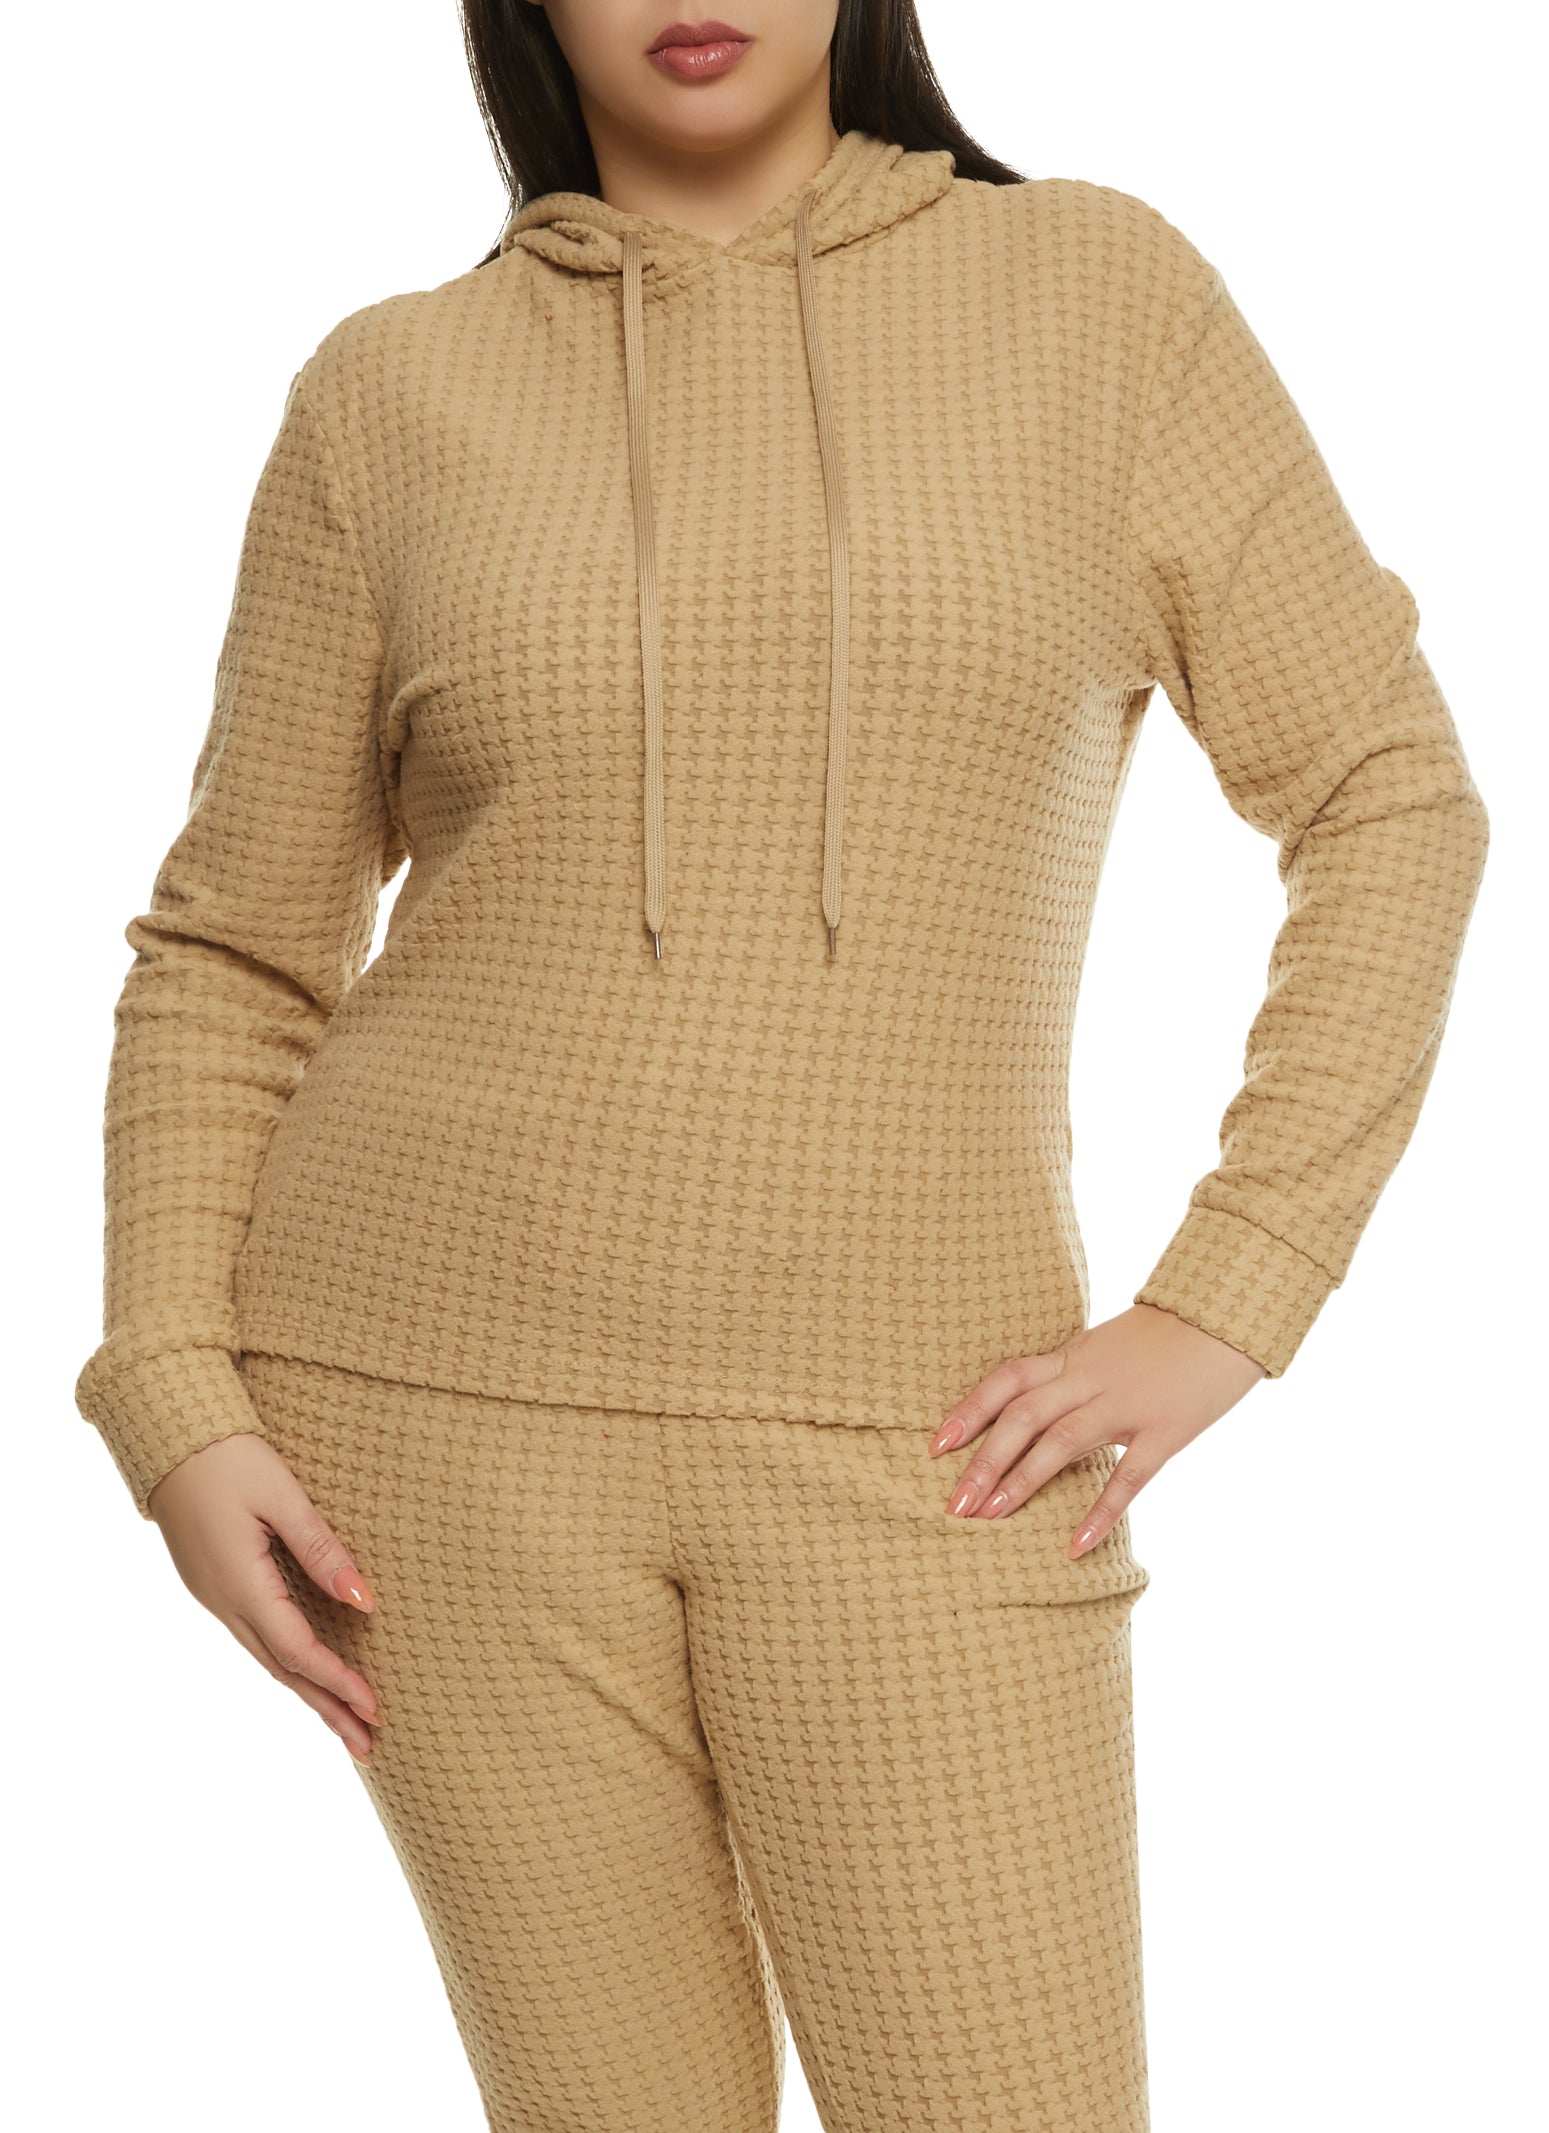 Womens Plus Size Solid Textured Knit Houndstooth Hoodie, Beige, Size 2X